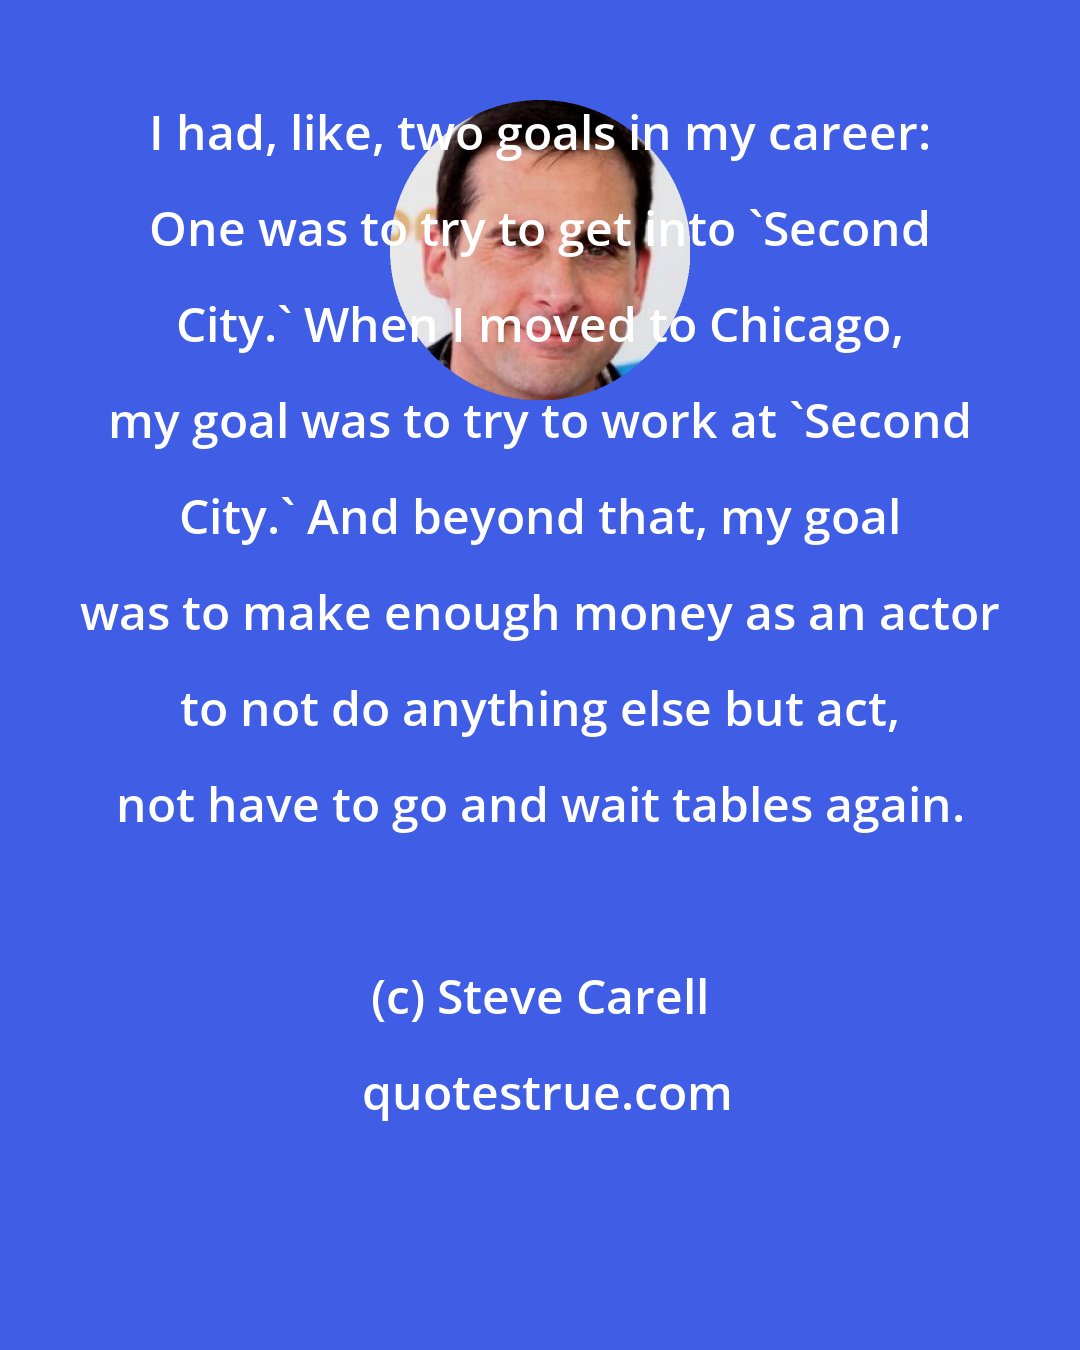 Steve Carell: I had, like, two goals in my career: One was to try to get into 'Second City.' When I moved to Chicago, my goal was to try to work at 'Second City.' And beyond that, my goal was to make enough money as an actor to not do anything else but act, not have to go and wait tables again.